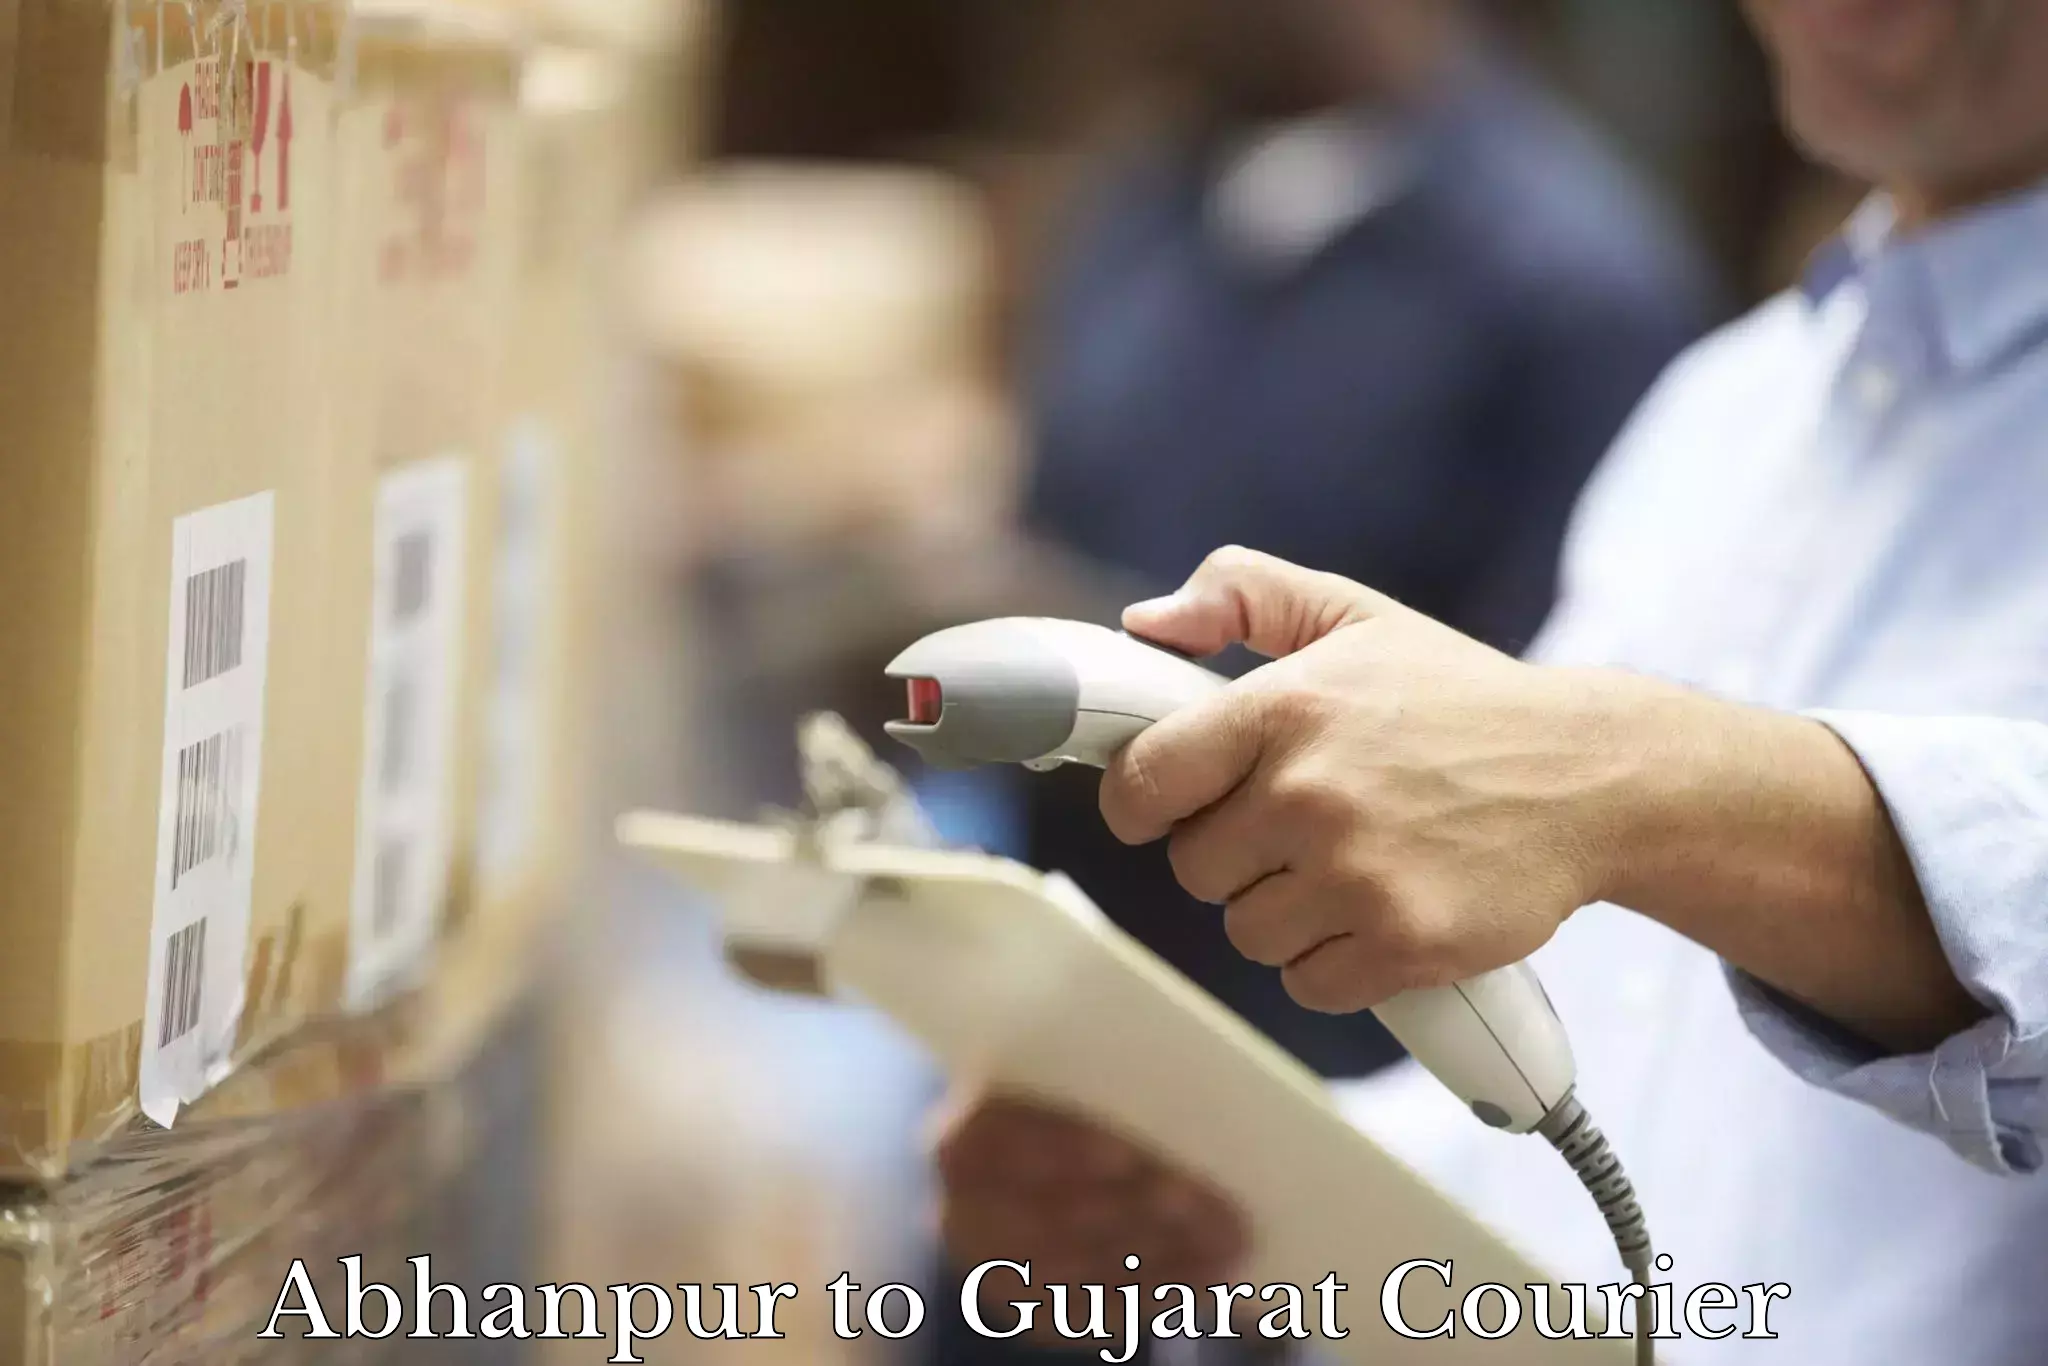 On-call courier service Abhanpur to Dahod